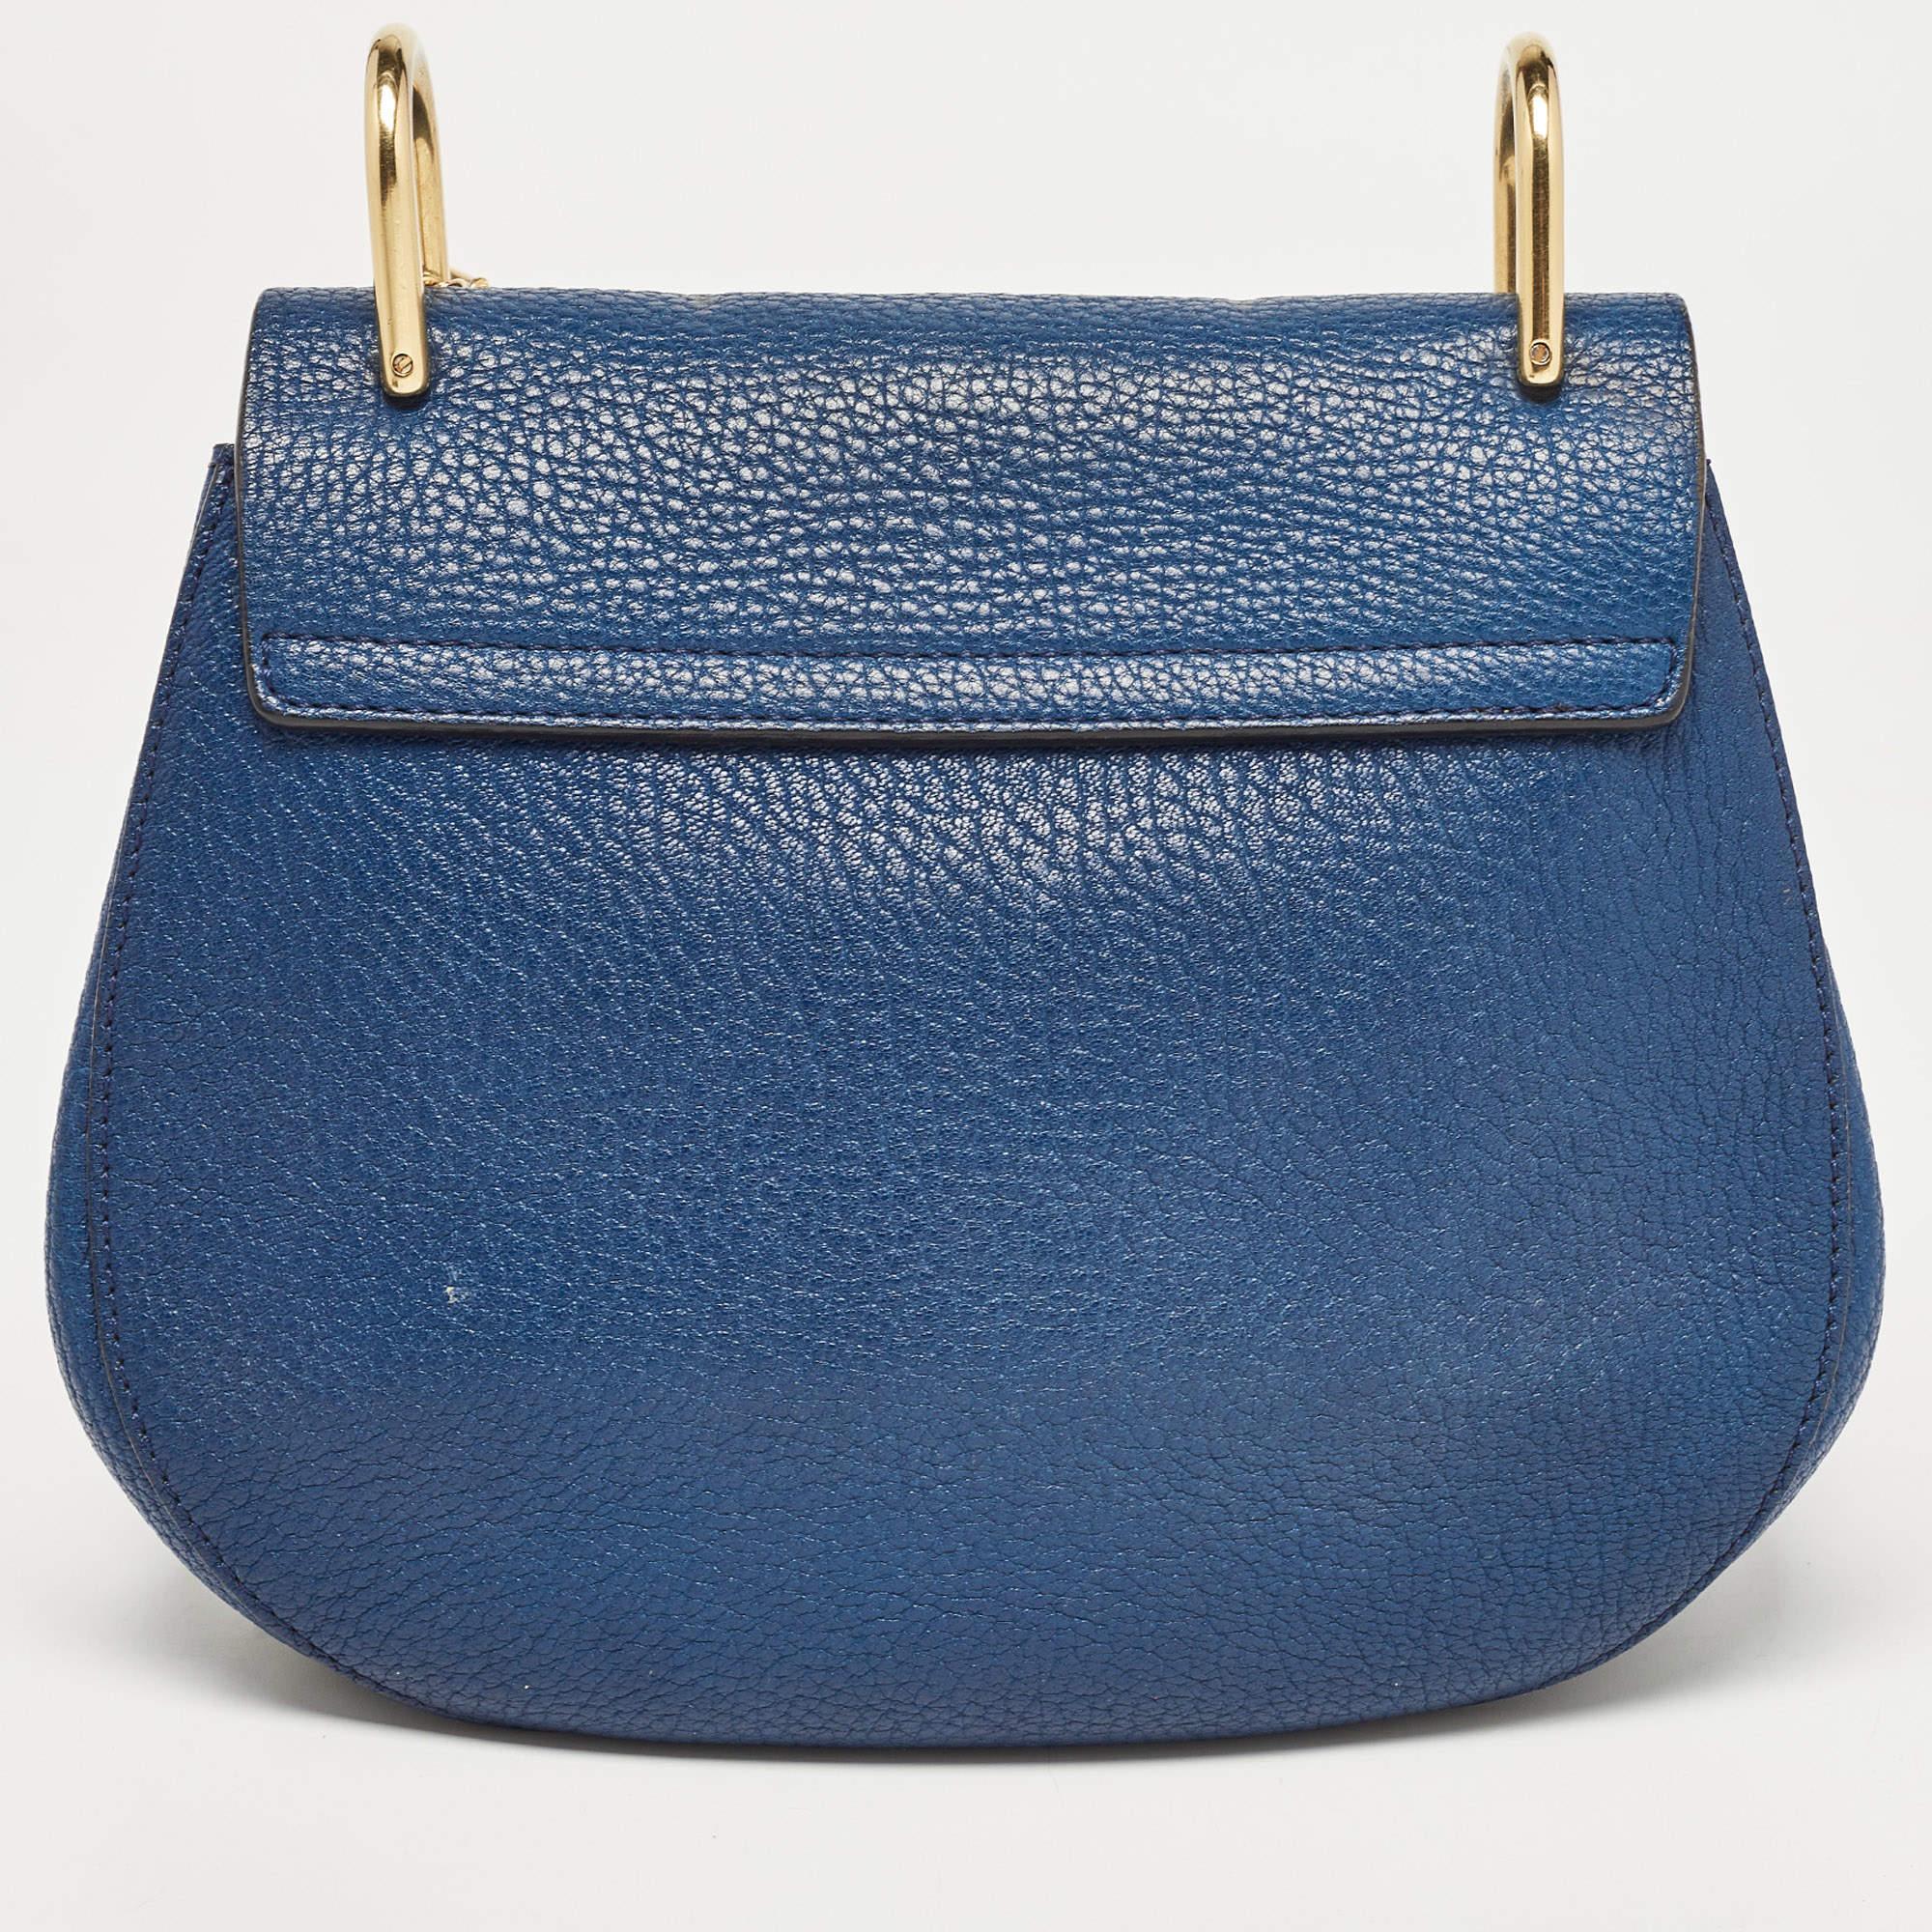 With its classic appeal and artistic design, this Chloe bag will win your heart at first sight. The gold-tone accents on the exterior of this blue creation make it a standout piece in your closet. Created from leather, it features a shoulder strap,